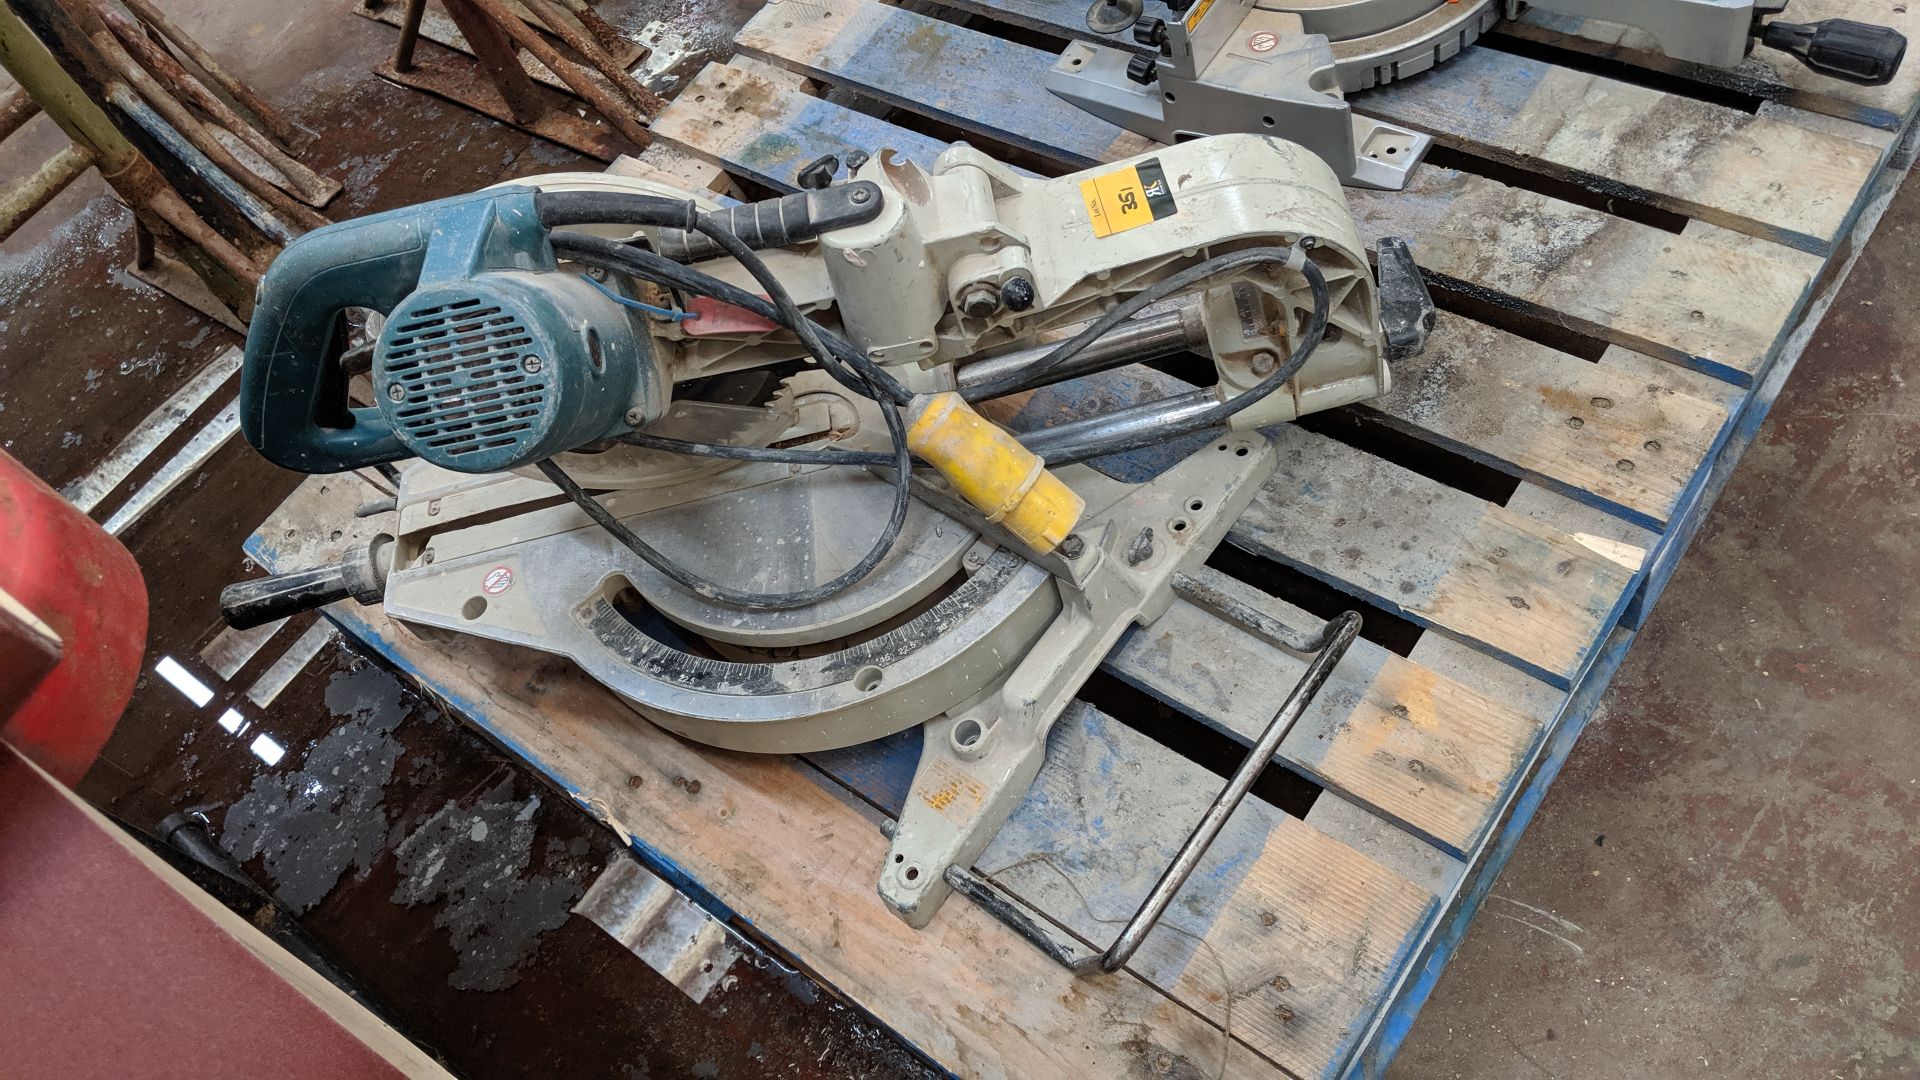 Makita 110V mitre saw model LS1013 IMPORTANT: Please remember goods successfully bid upon must be - Image 4 of 5